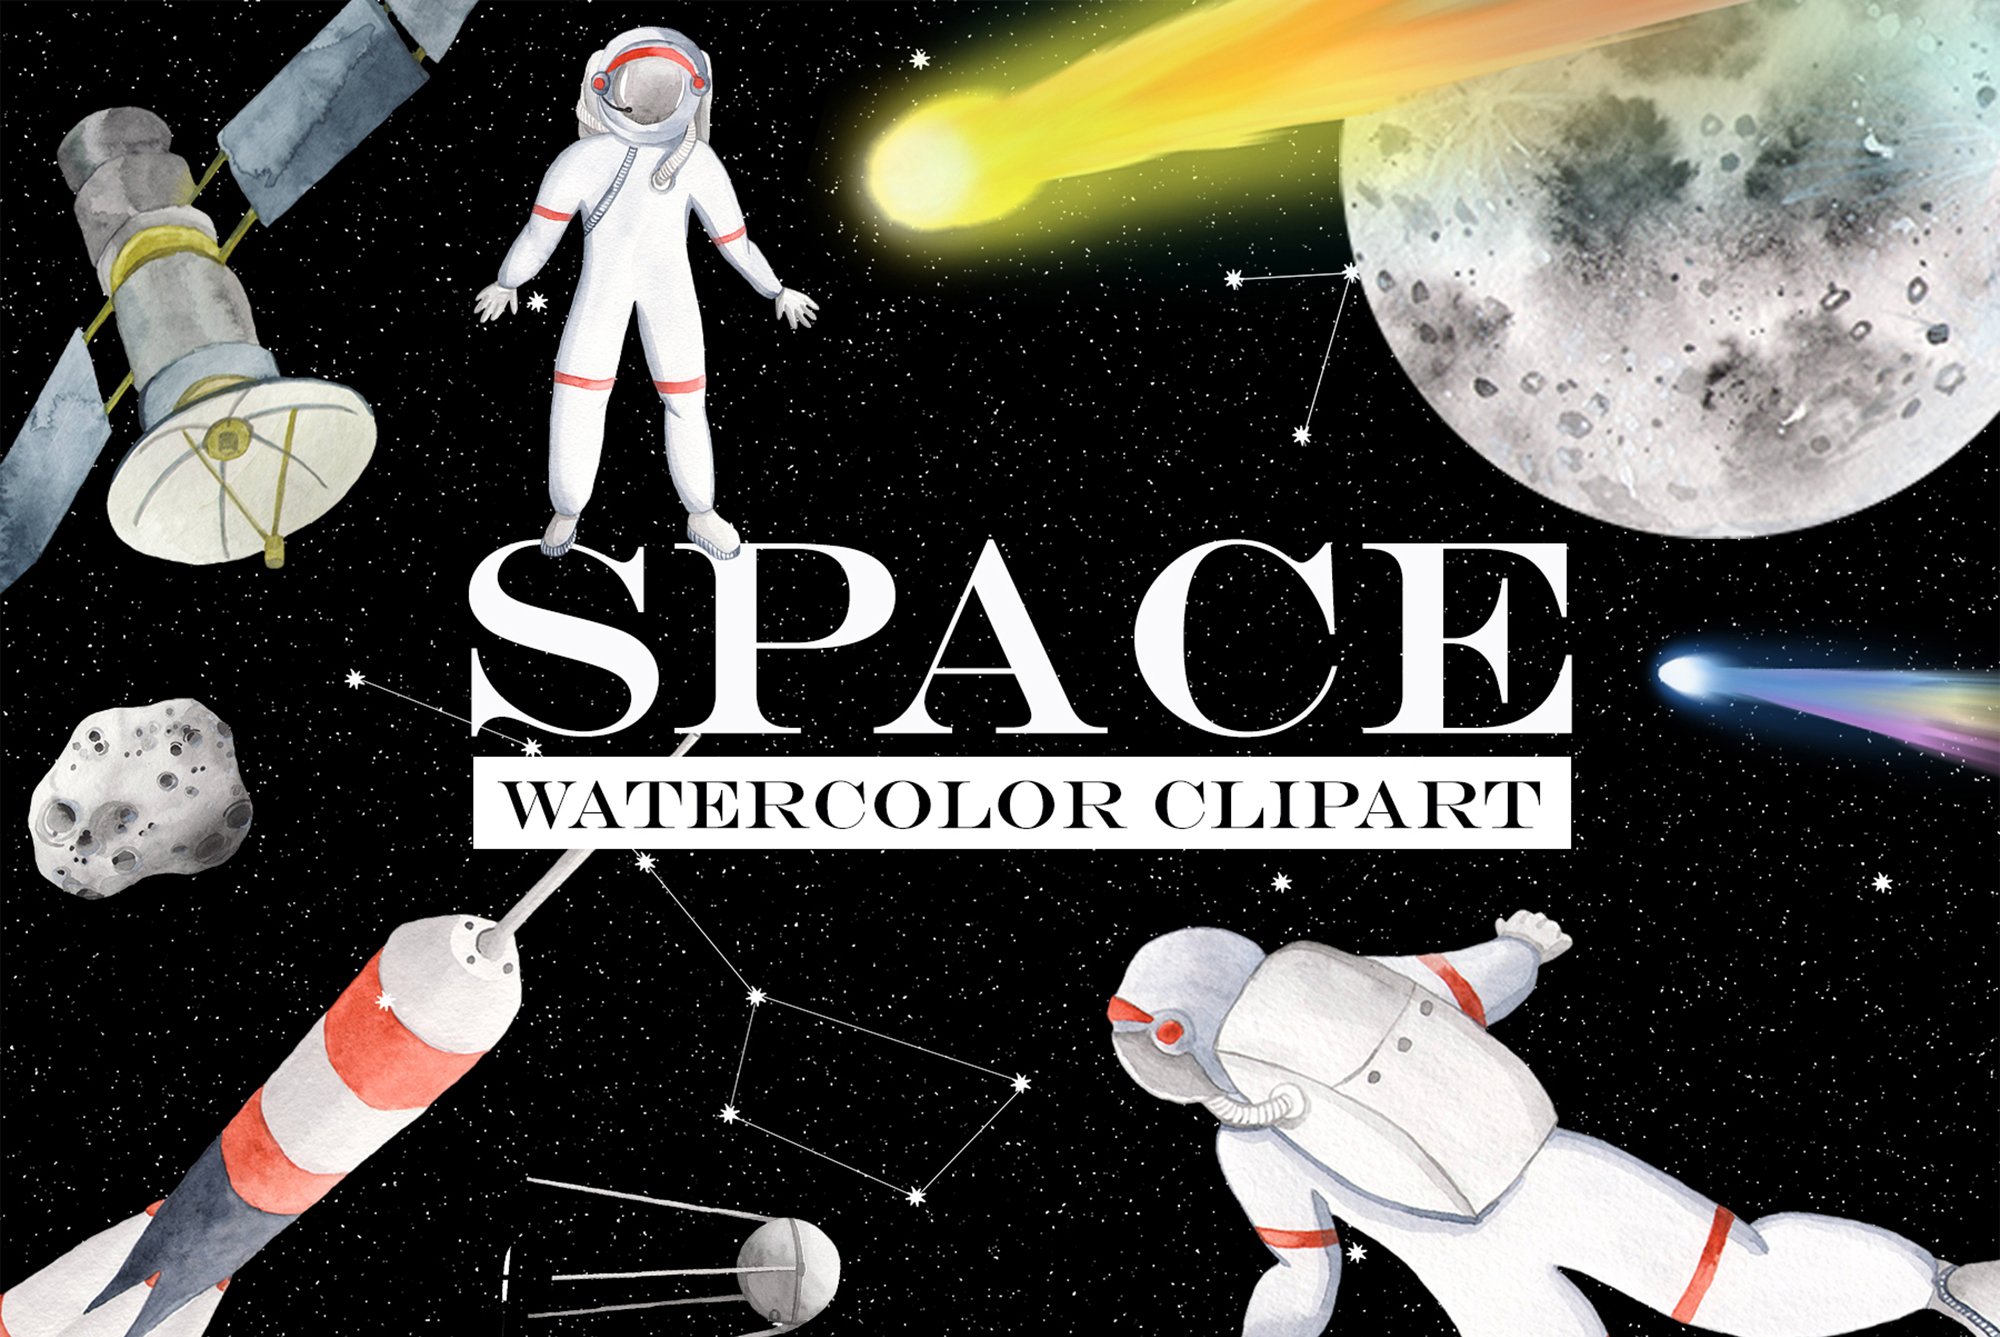 Space Watercolor clipart cover image.